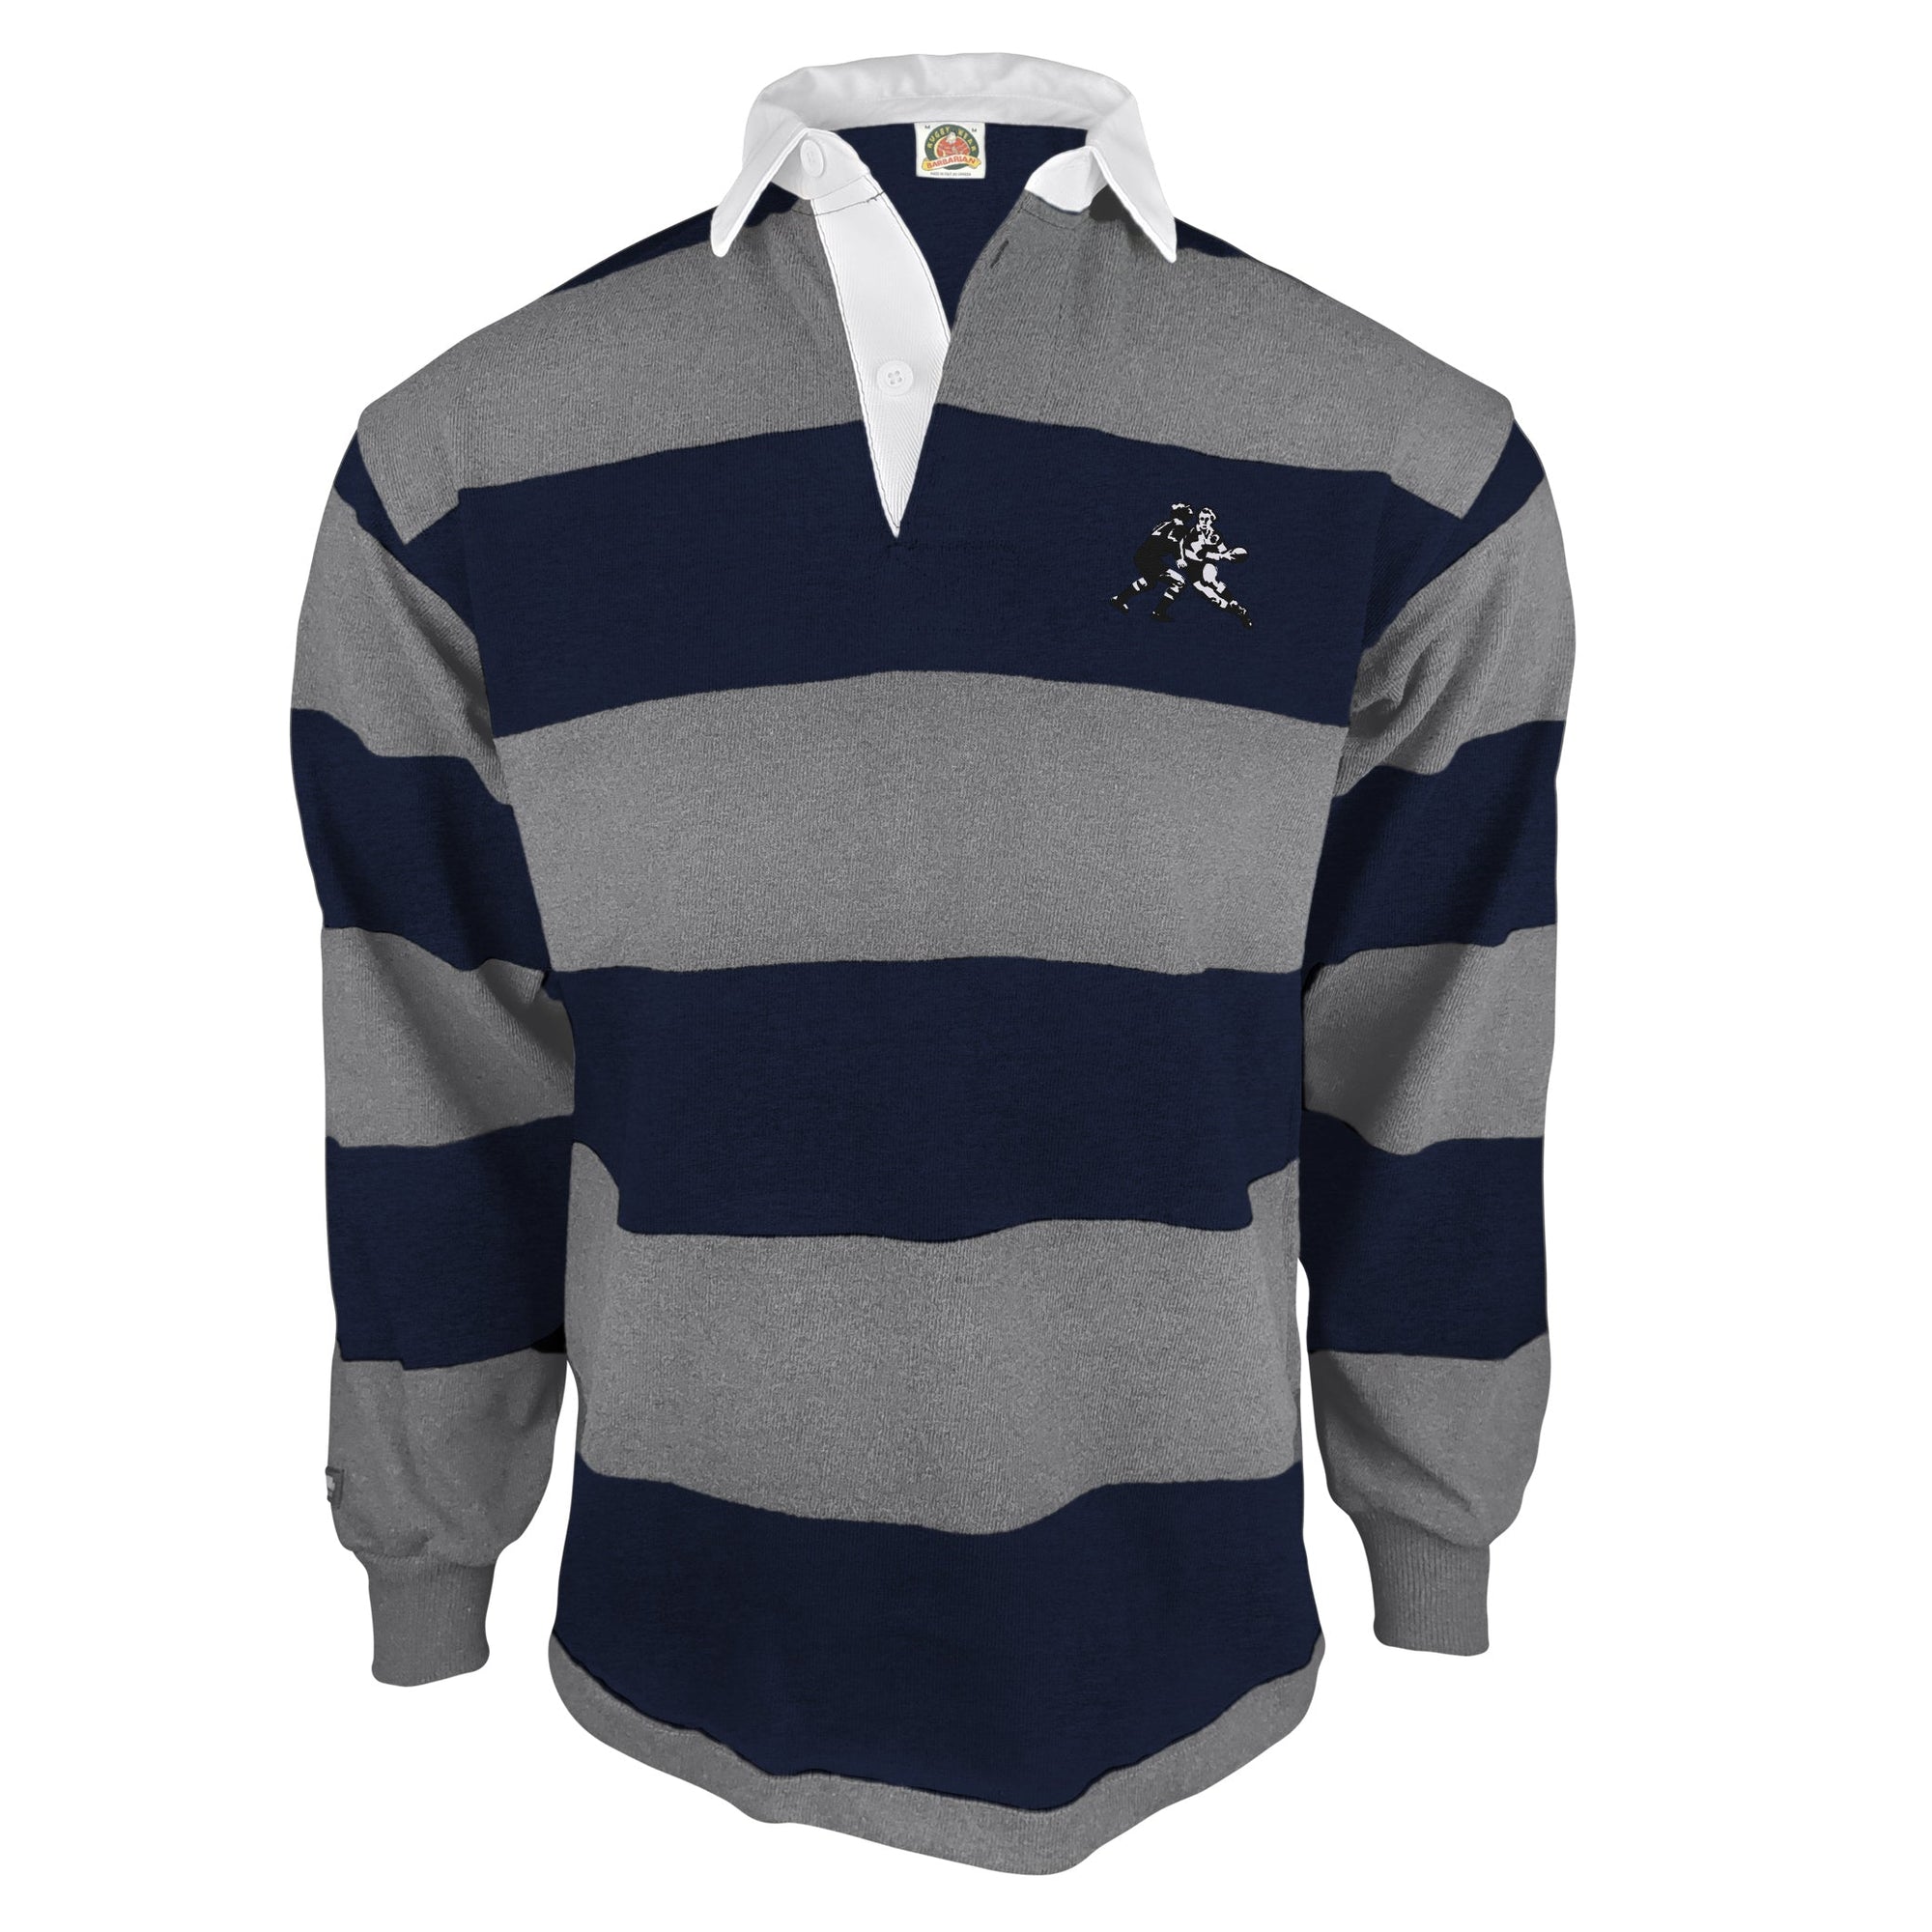 Rugby Imports Rugby Imports 4 Inch Stripe Jersey